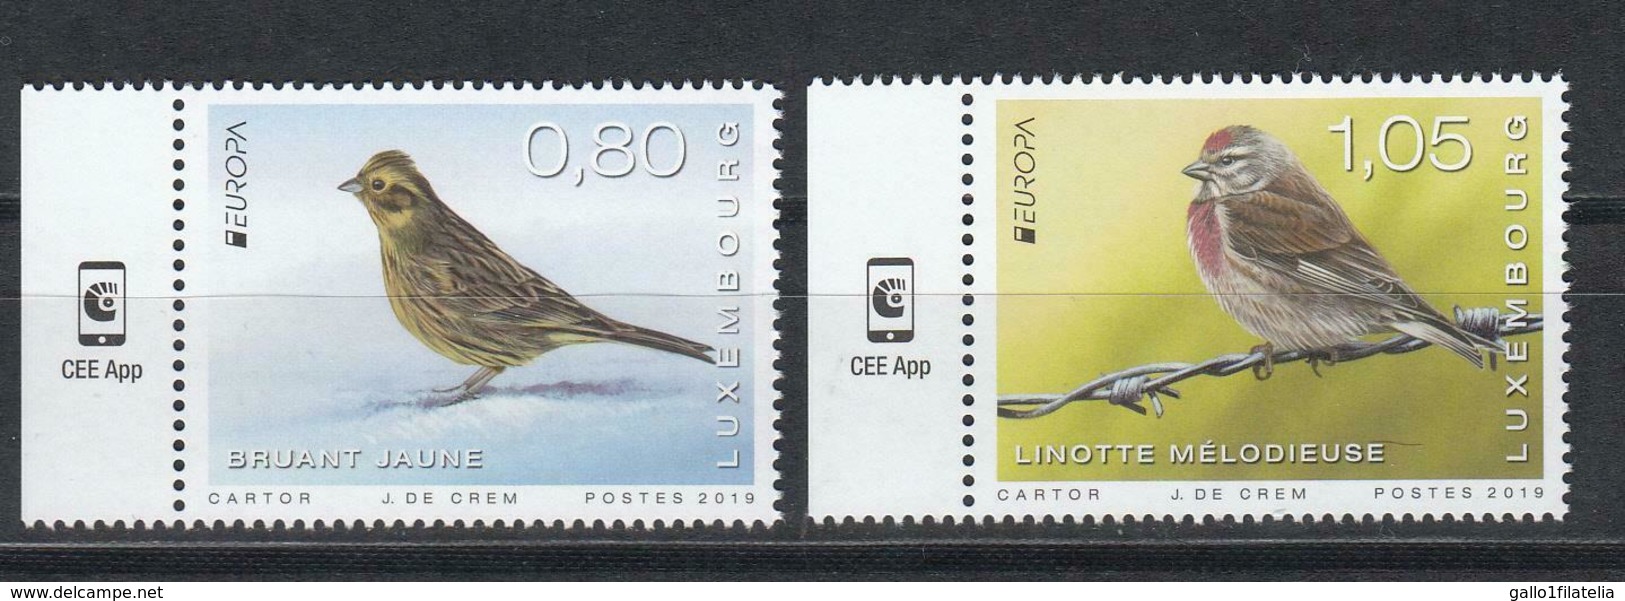 2019 - LUSSEMBURGO / LUXEMBOURG - EUROPA  CEPT - UCCELLI / BIRDS - SET COMPLETO. MNH. - 2019